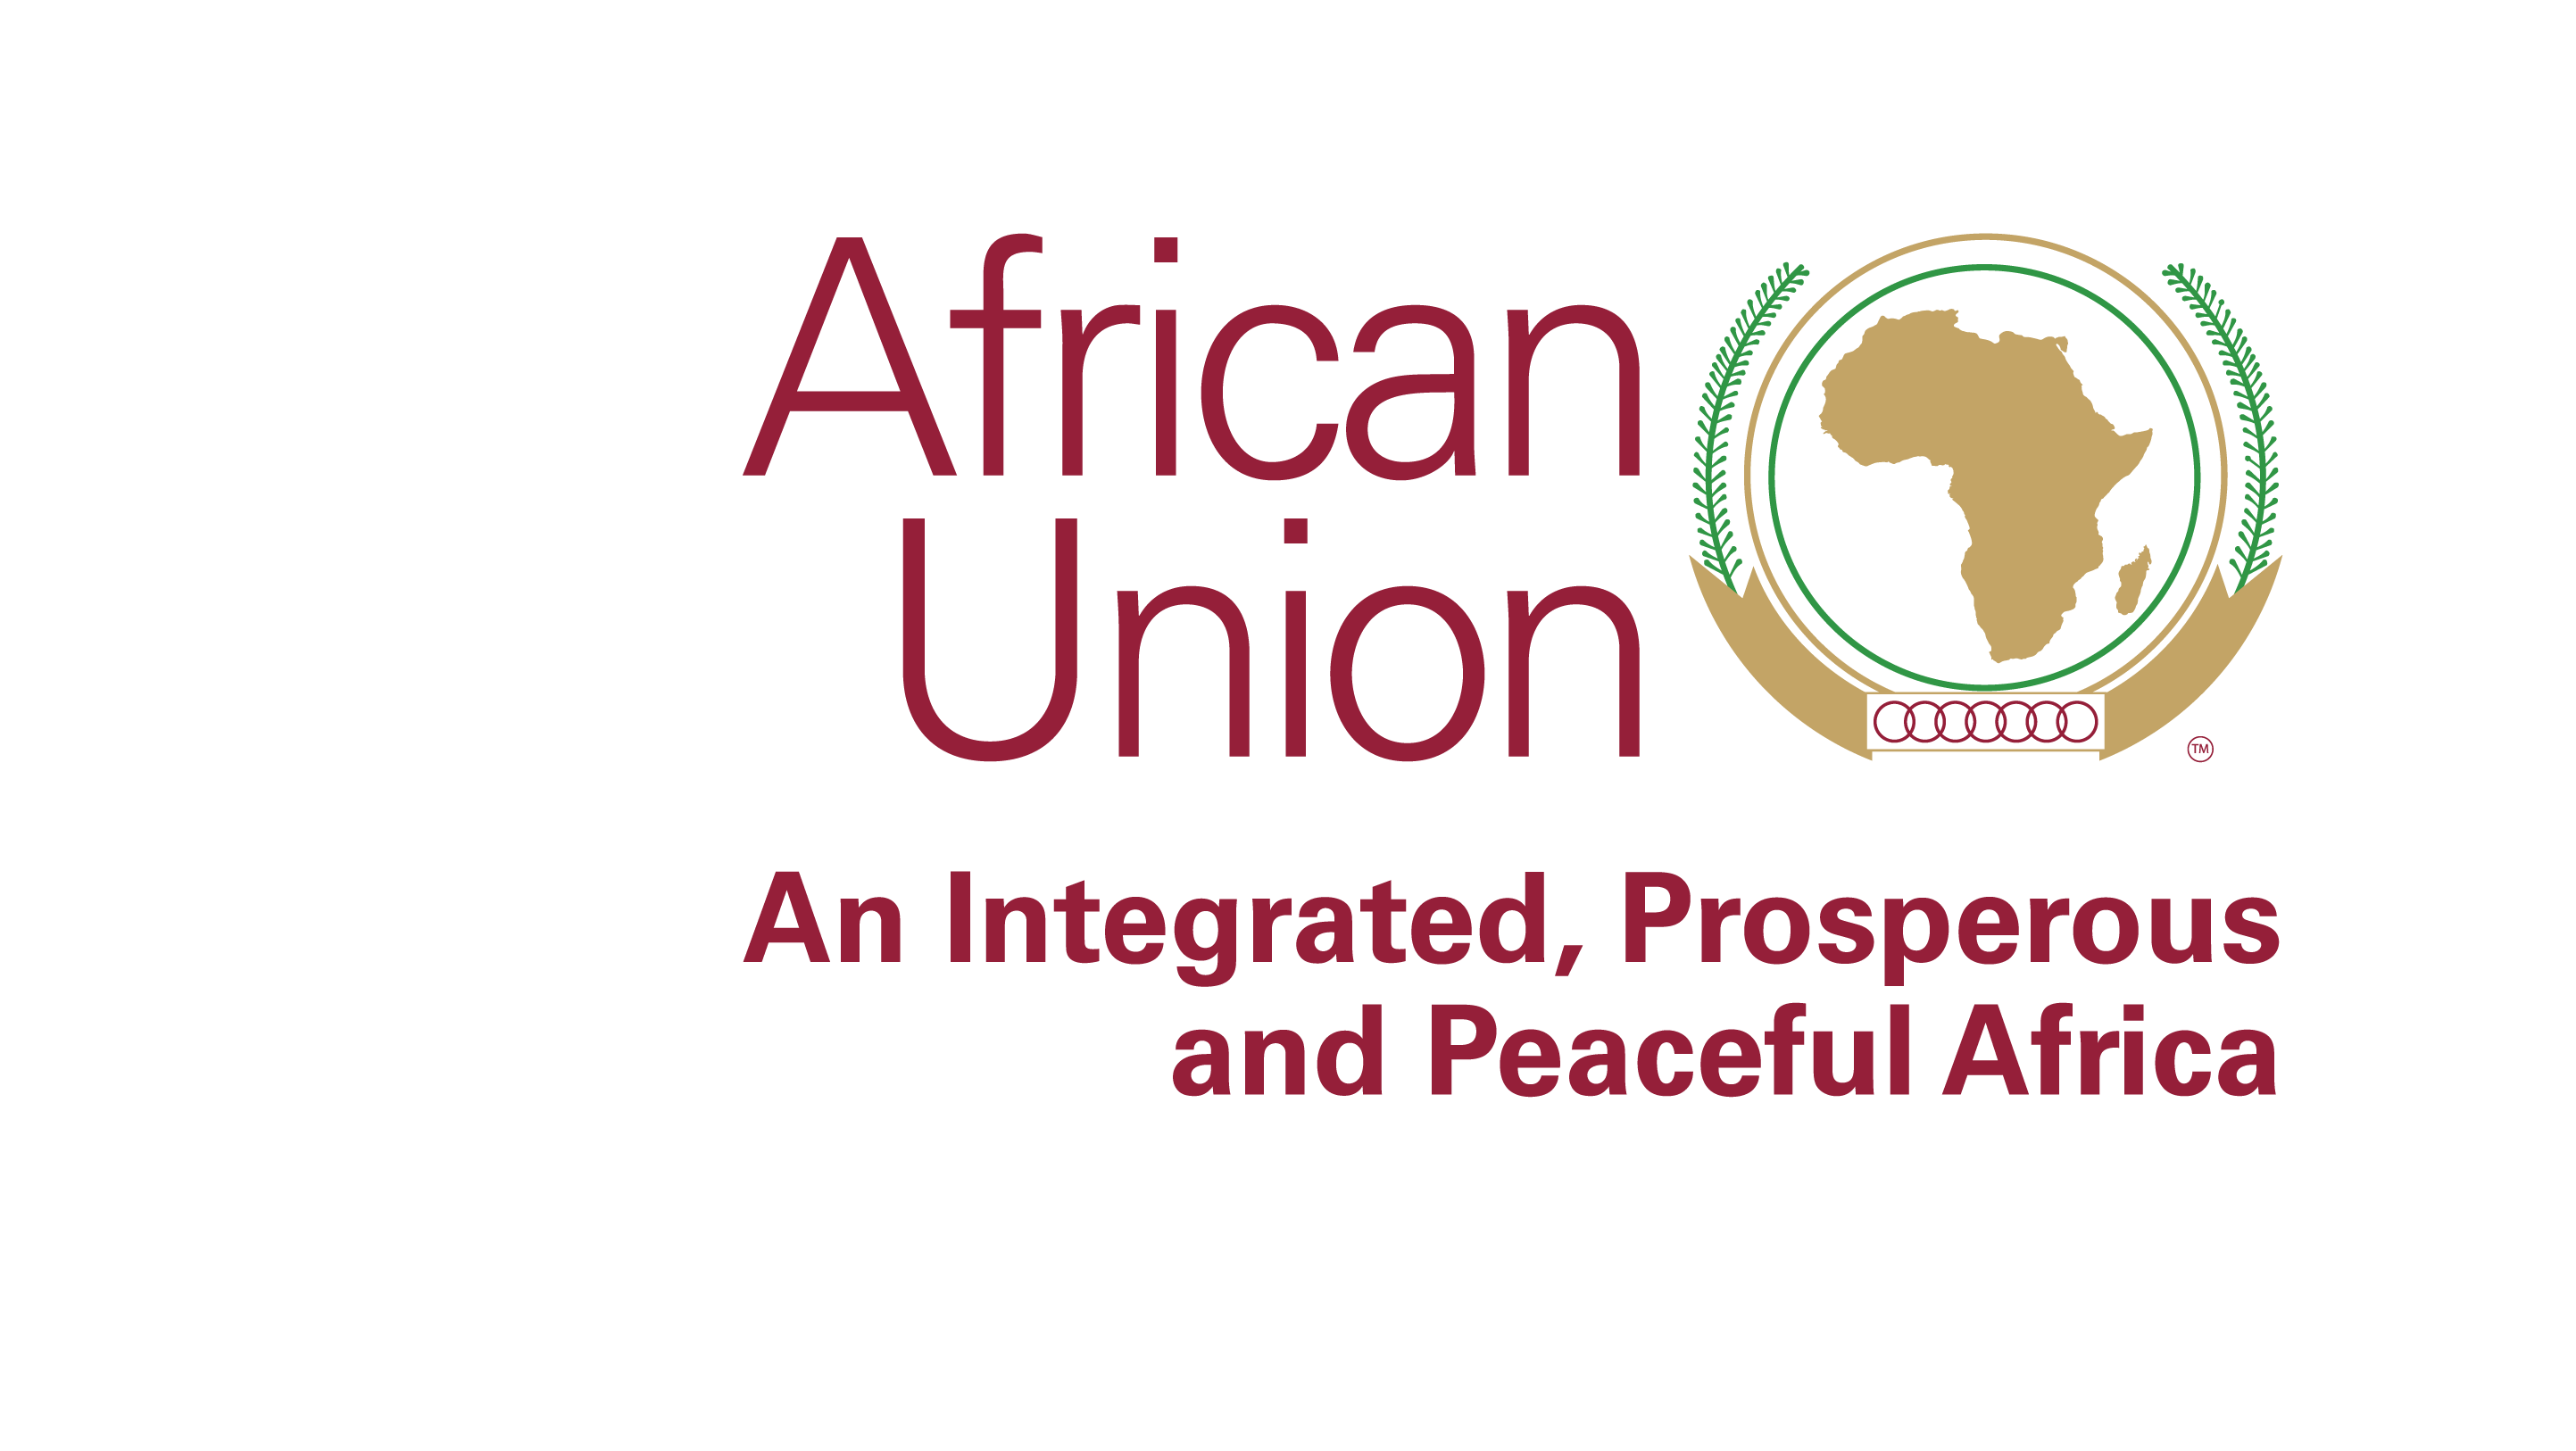 African Union Commission (AUC) Pan-Africa Youth Online Forum 2019 in Addis Ababa, Ethiopia